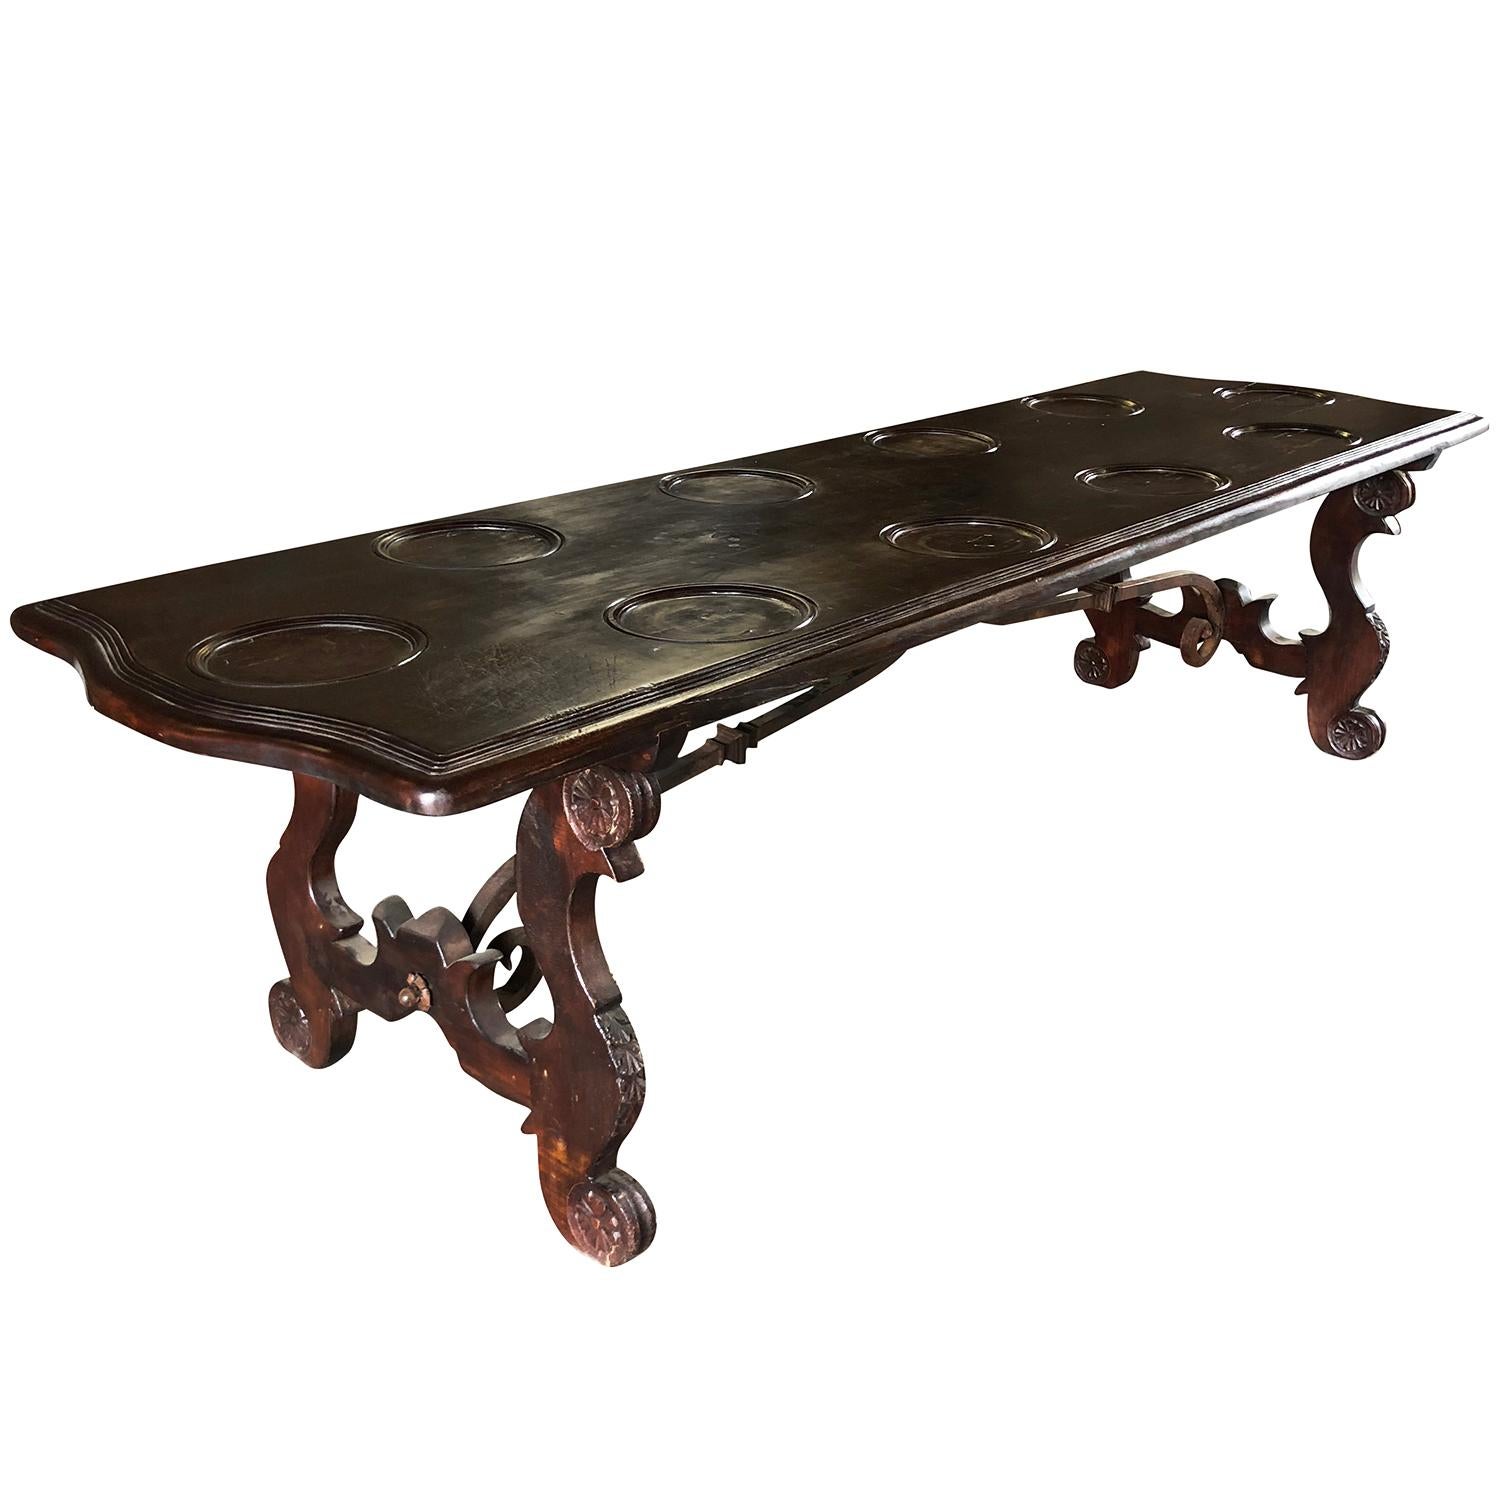 Hand-Carved 18th Century Italian Antique Tuscan Renaissance Walnut Dining Room Table  For Sale